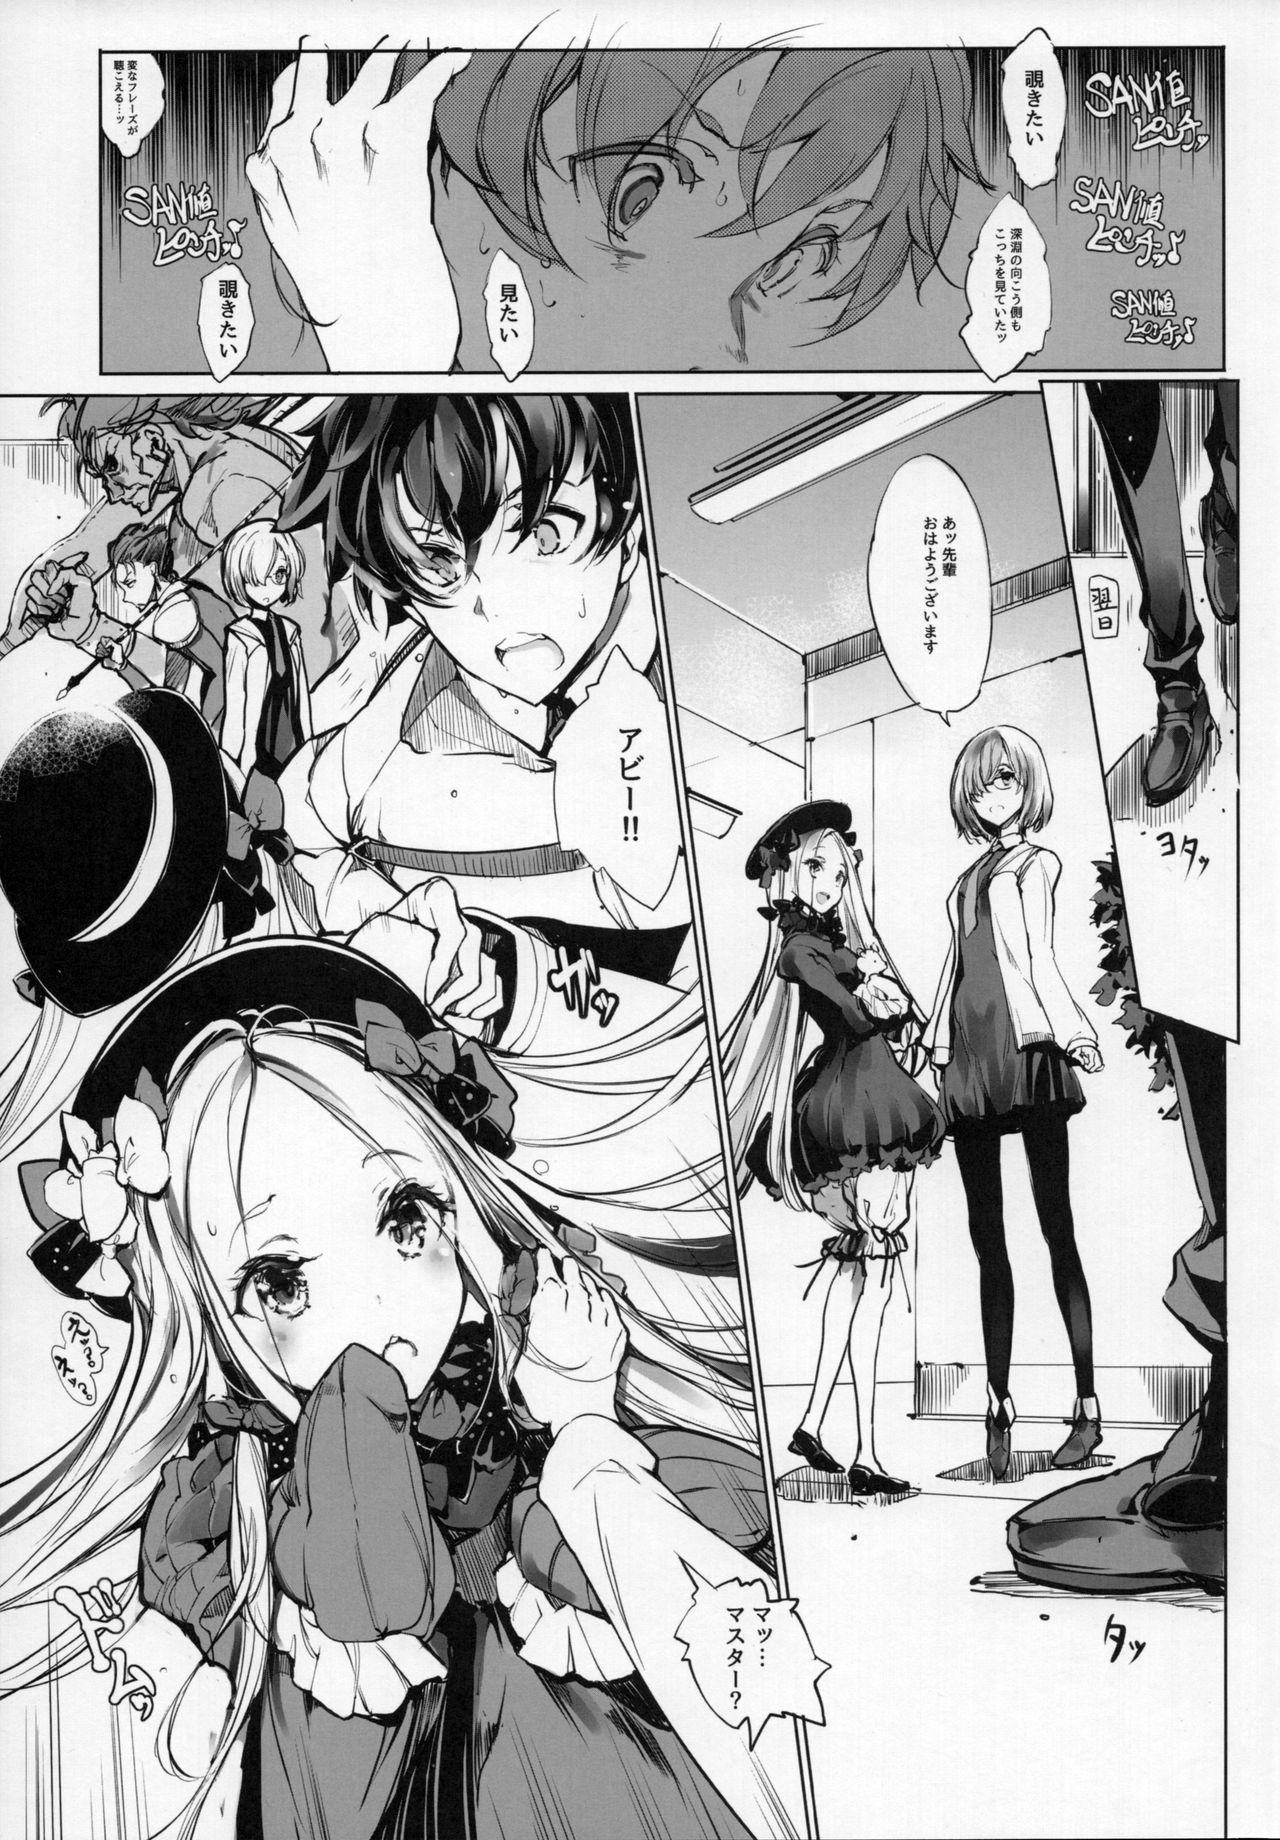 Spoon Sen no Ko o Haramu Mori no Shoujo - The girl of the woods with a thousand young - Fate grand order Shavedpussy - Page 6